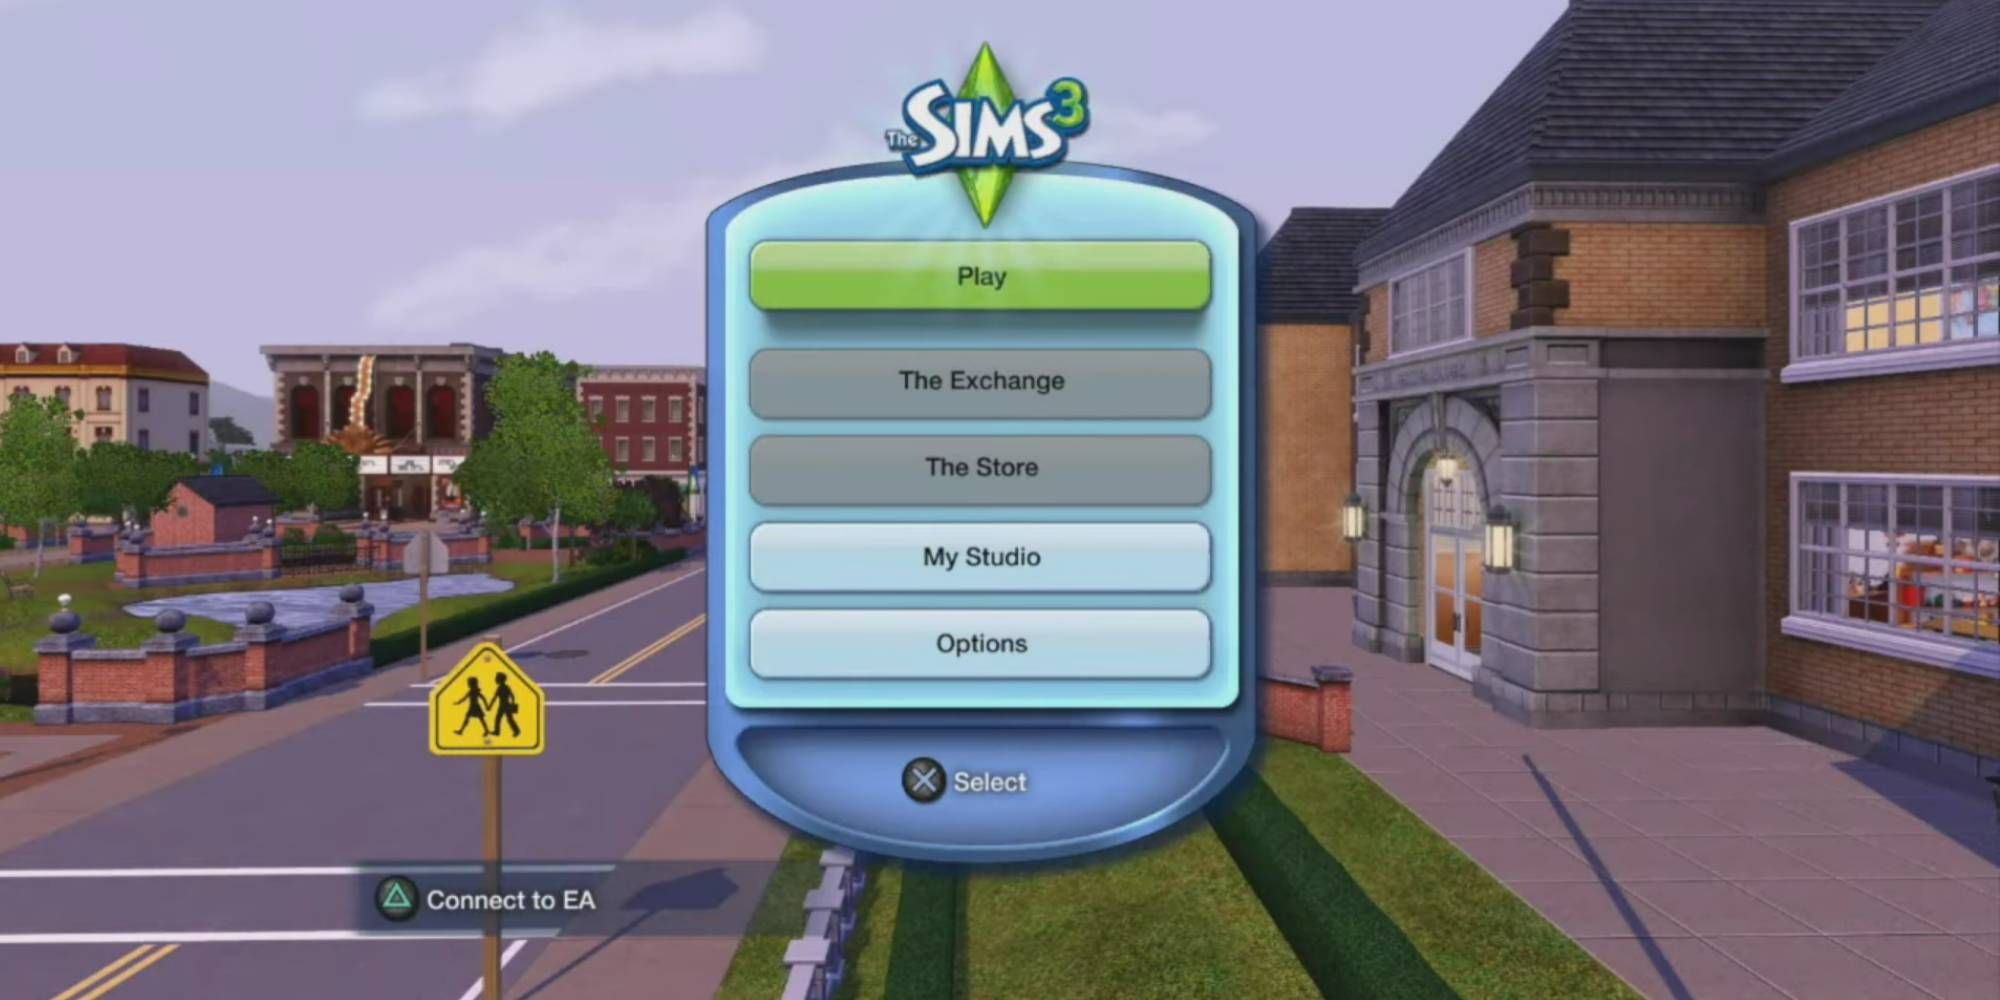 The in-game menu for The Sims 3 Playstation 3